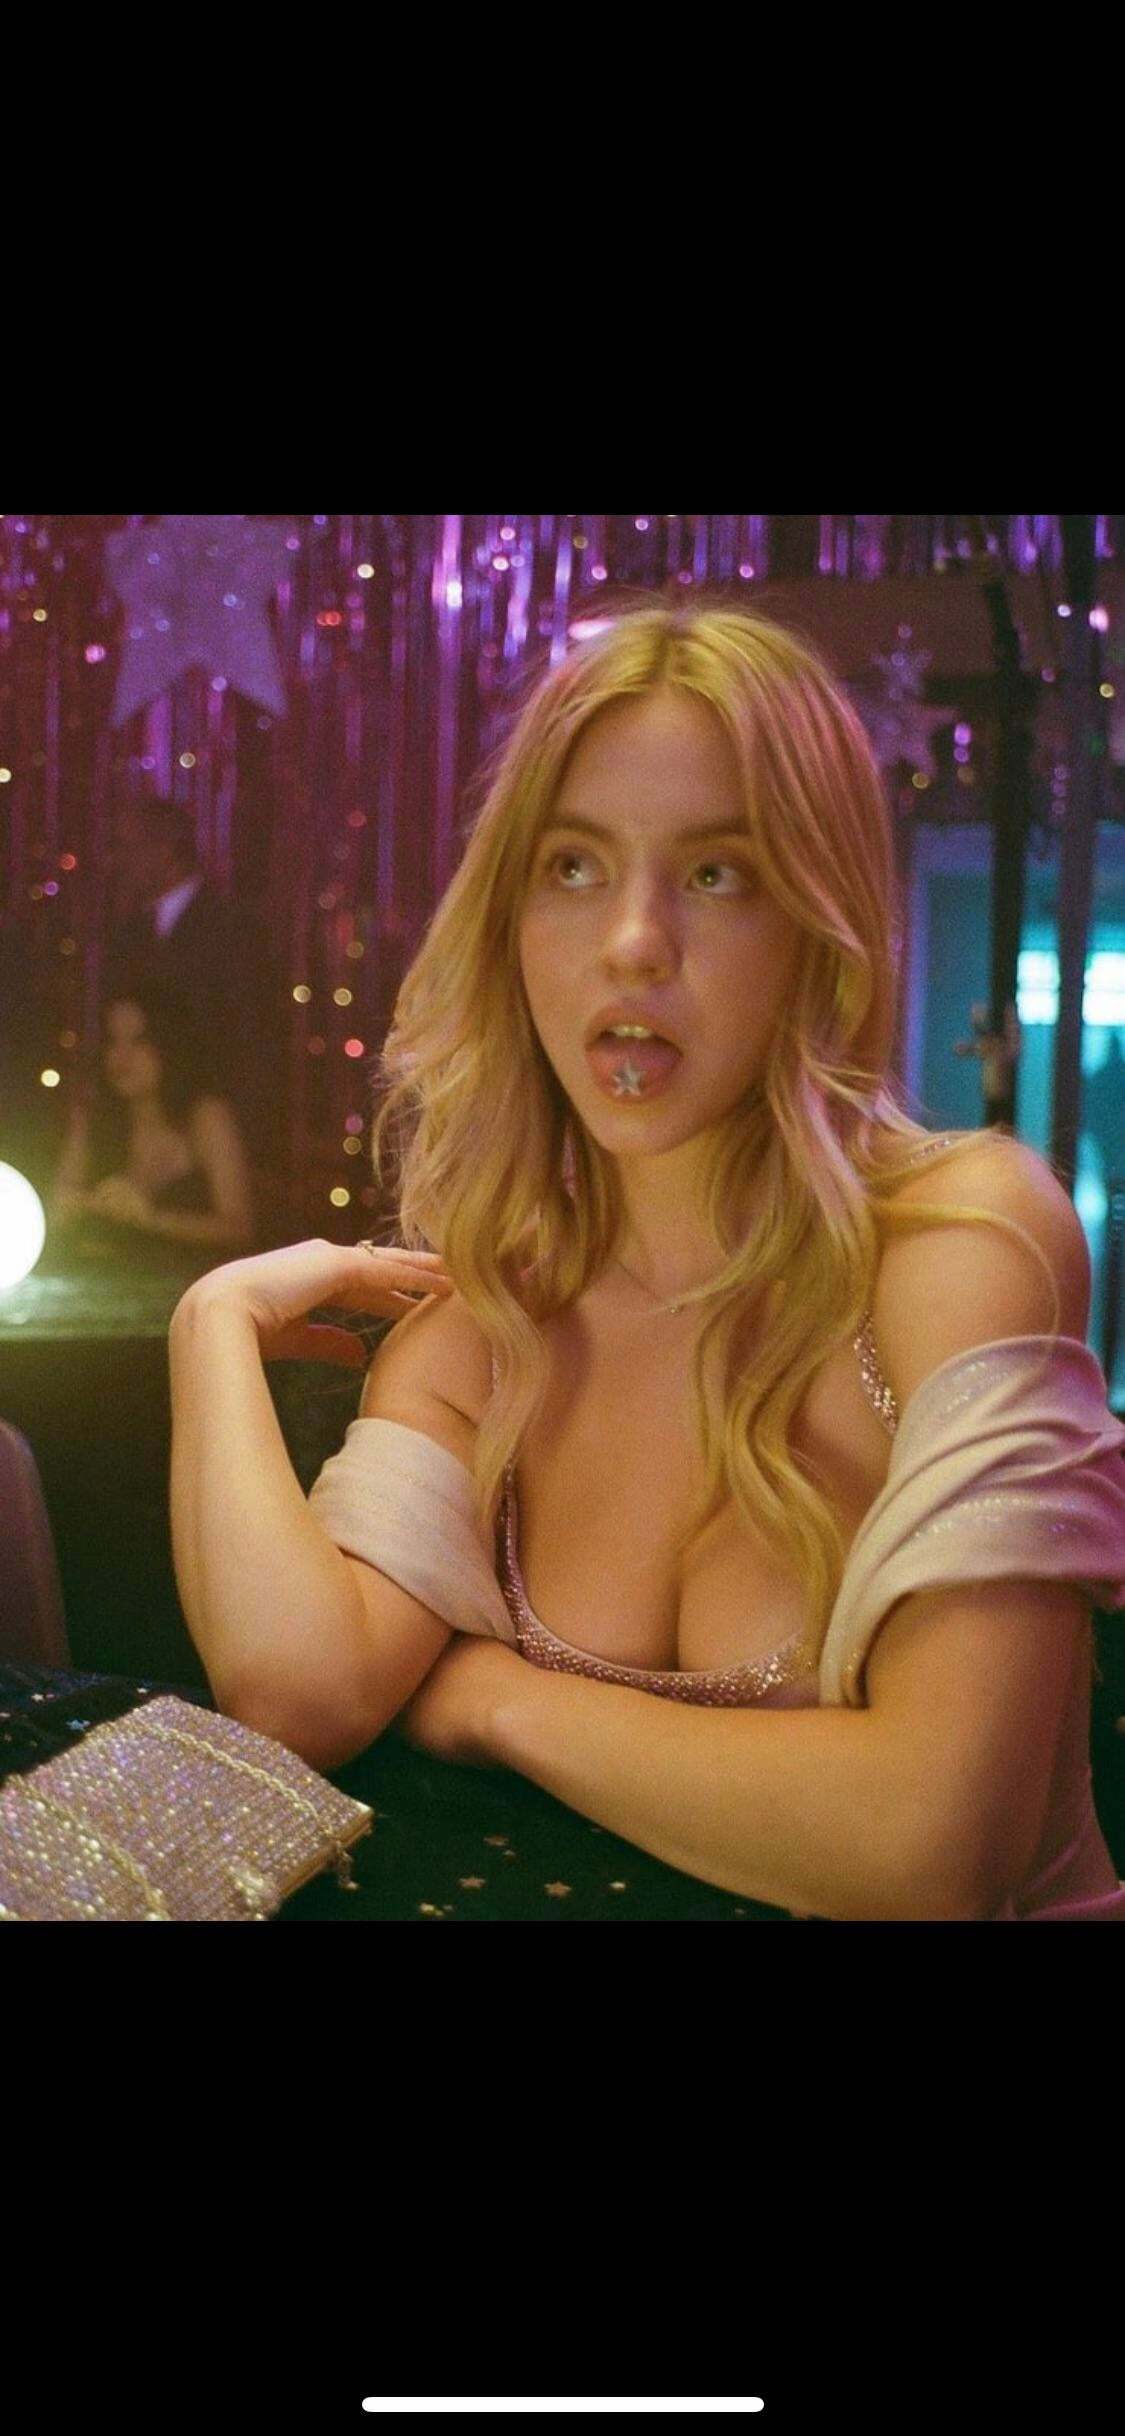 Im so horny for Sydney Sweeney right now…